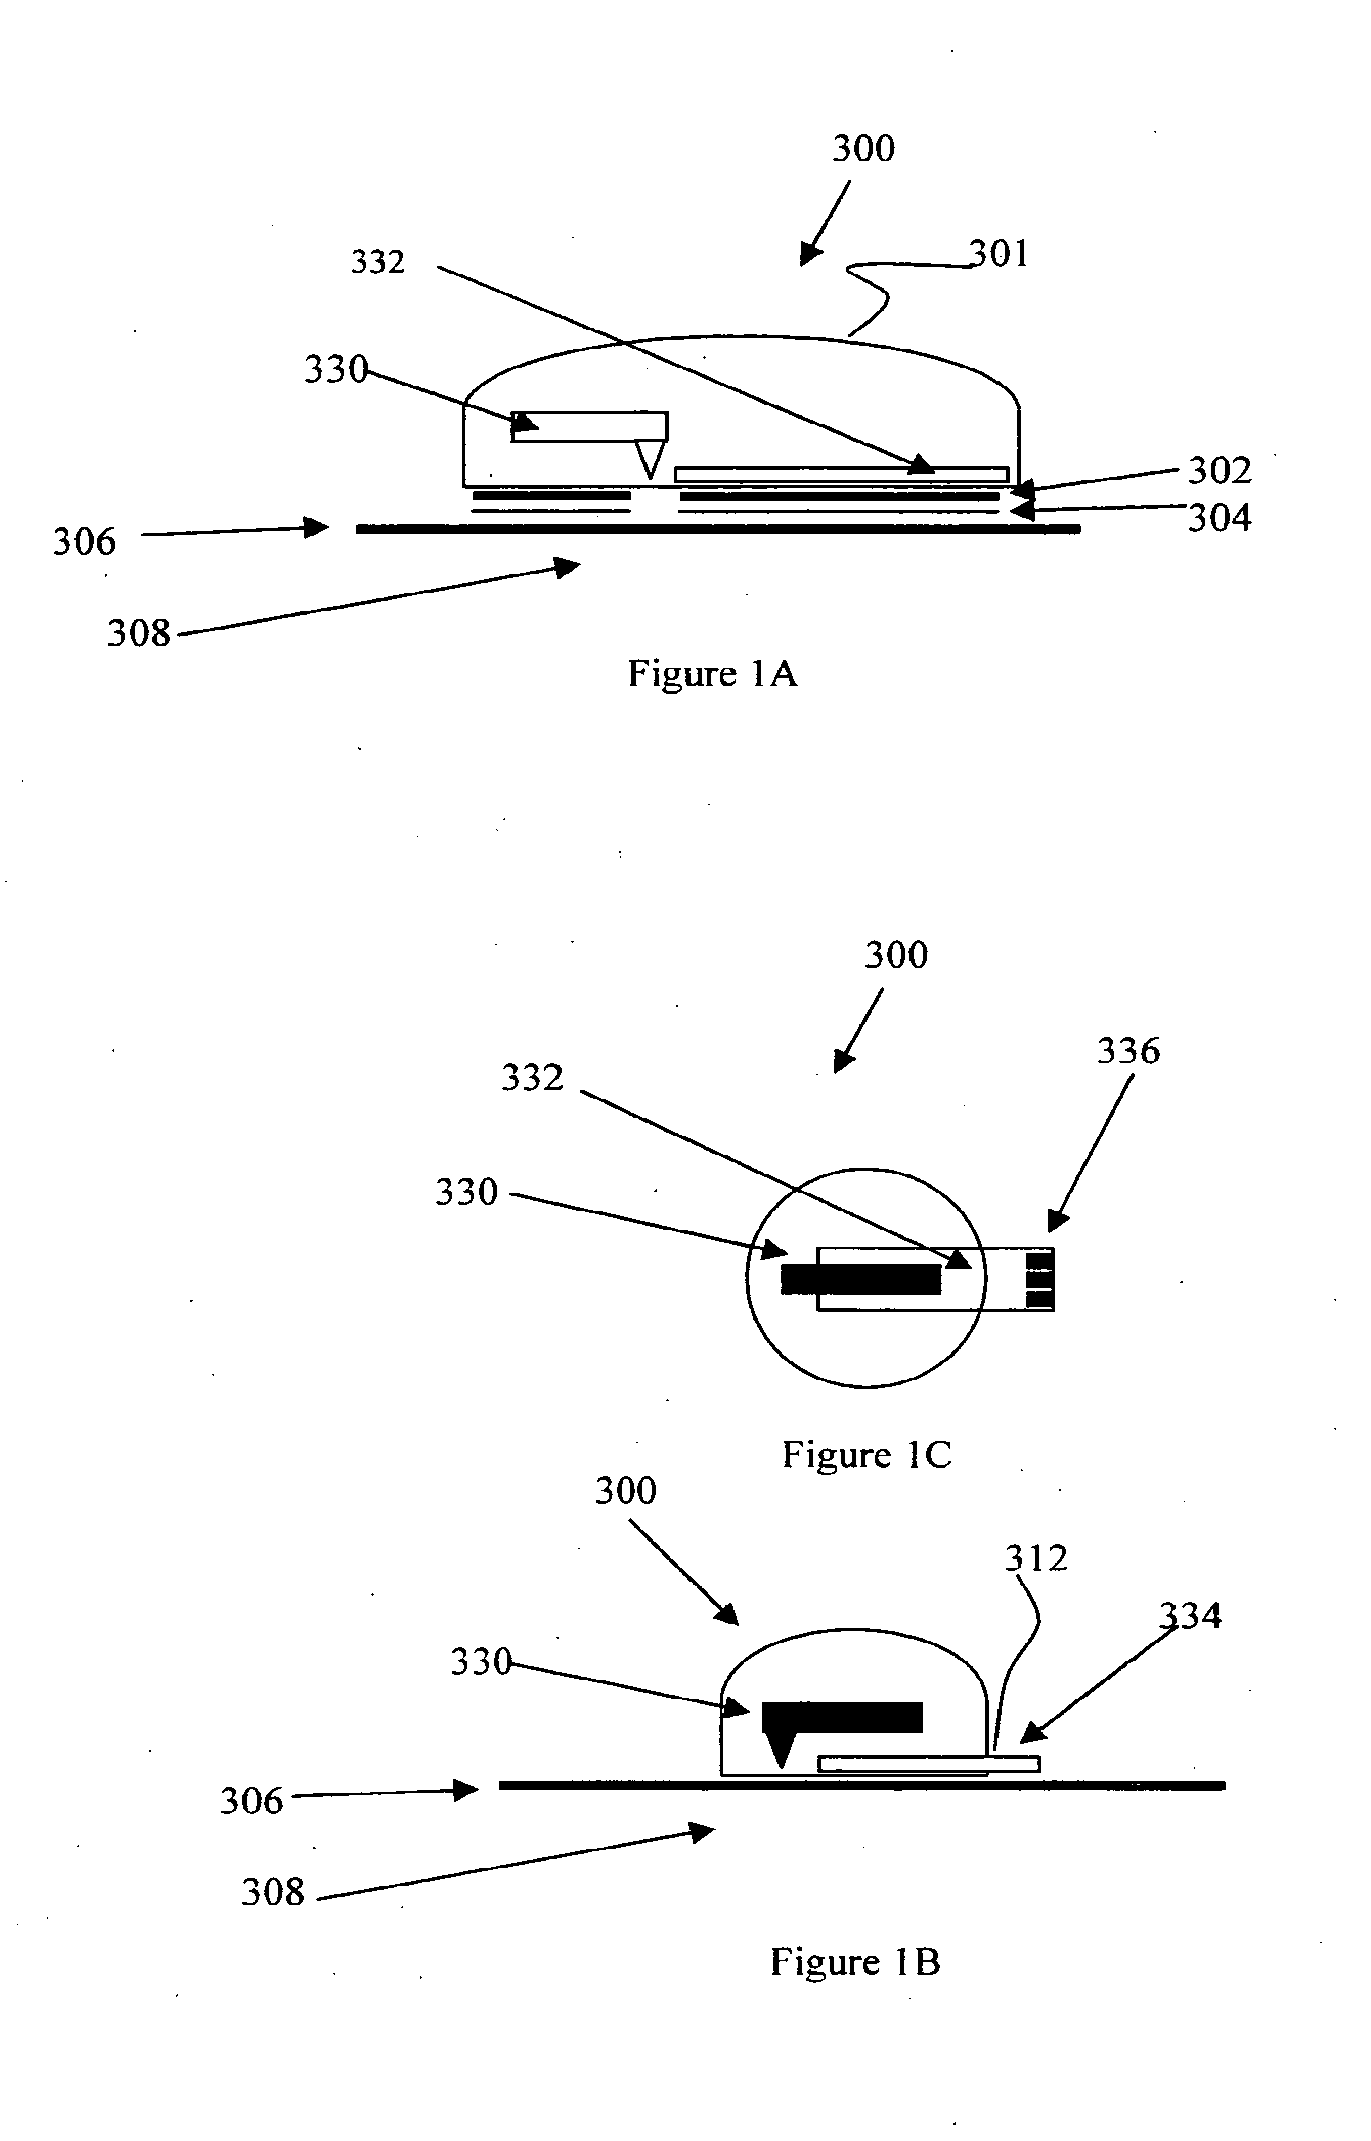 Device, System and Method for Modular Analyte Monitoring